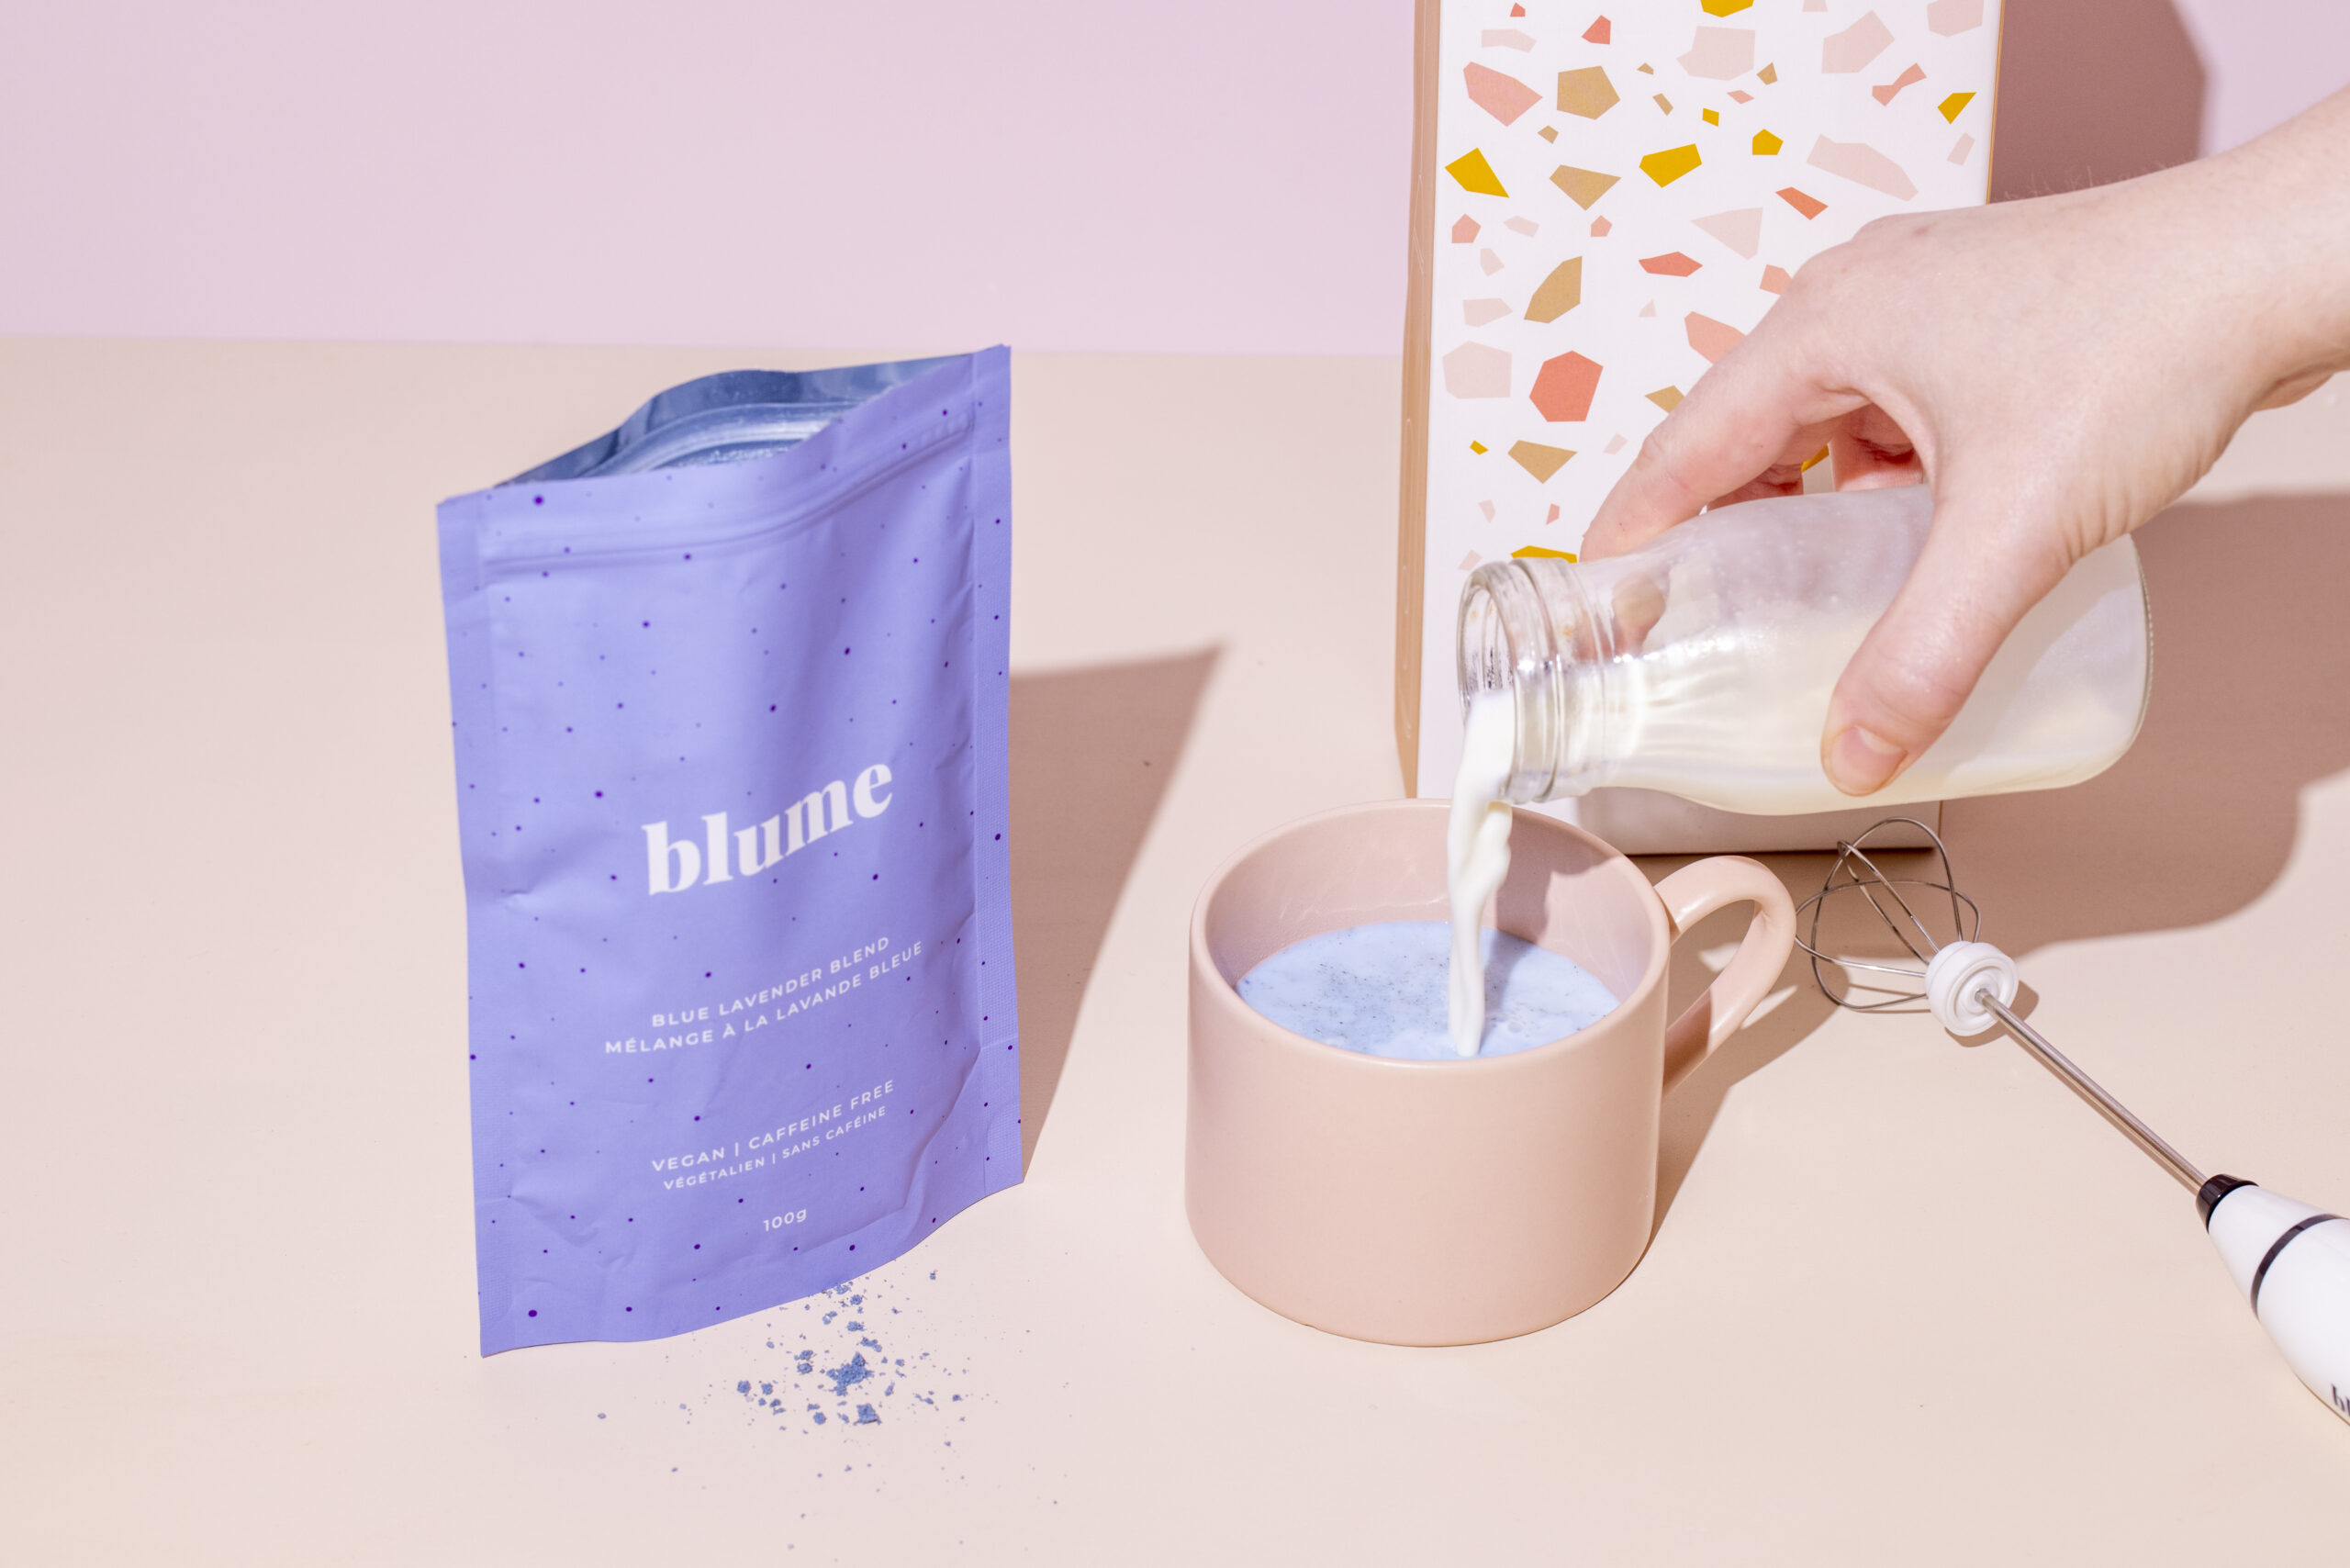 Blume Milk Frother- Pink